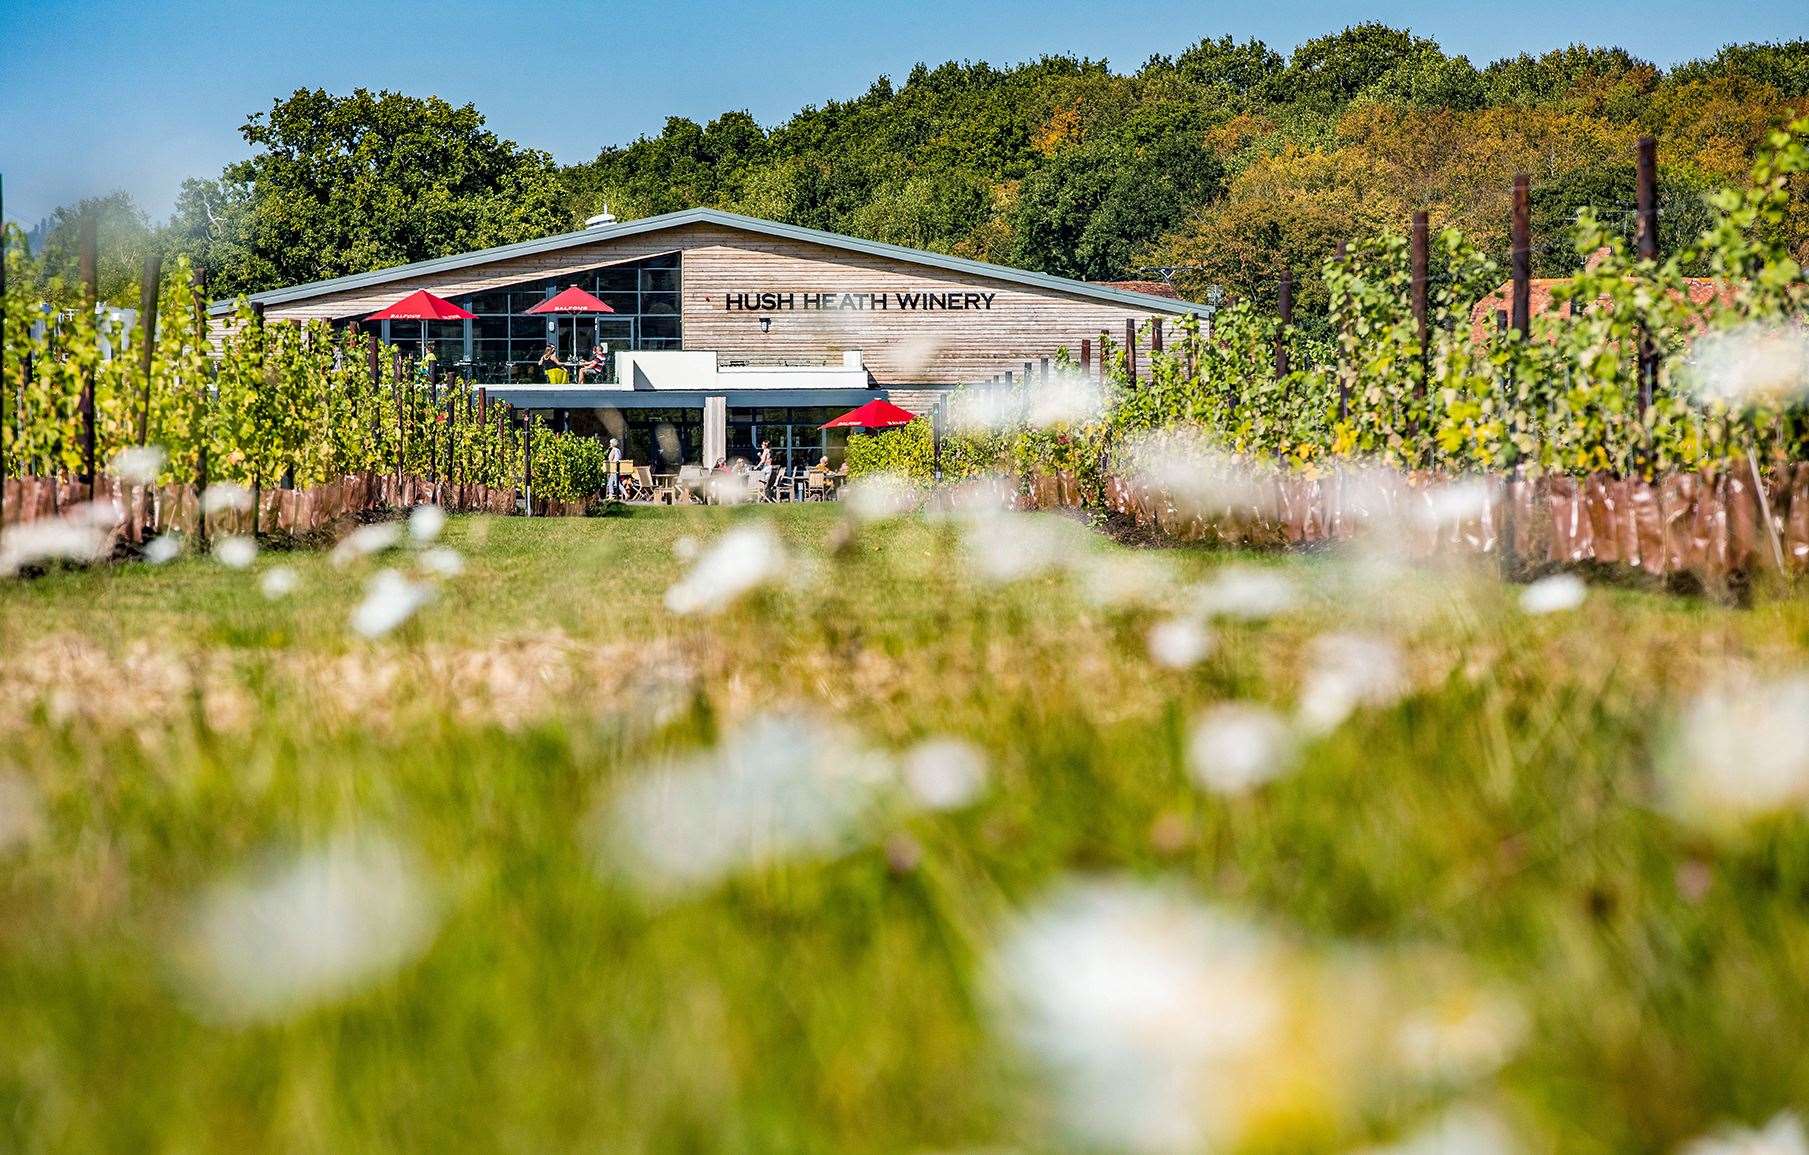 Hush Heath Estate is one of seven wine producers banding together to encourage wine tourism in Kent